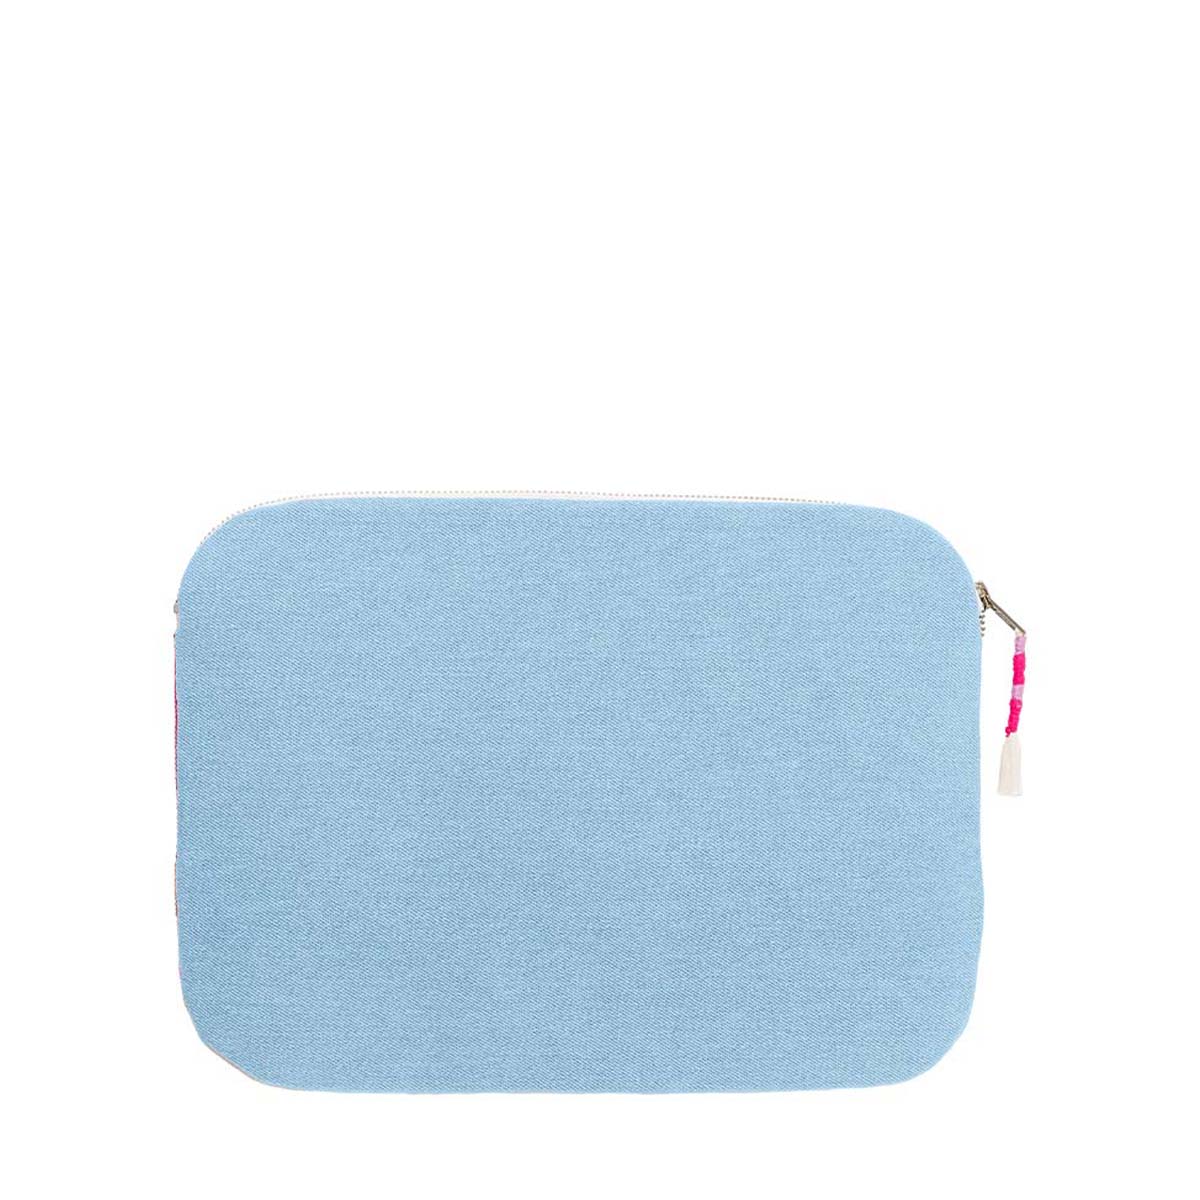 The Elenita Laptop Case in Raspberry Paleta. The back has a solid sky blue color and a mini woven tassel attached to the zipper.